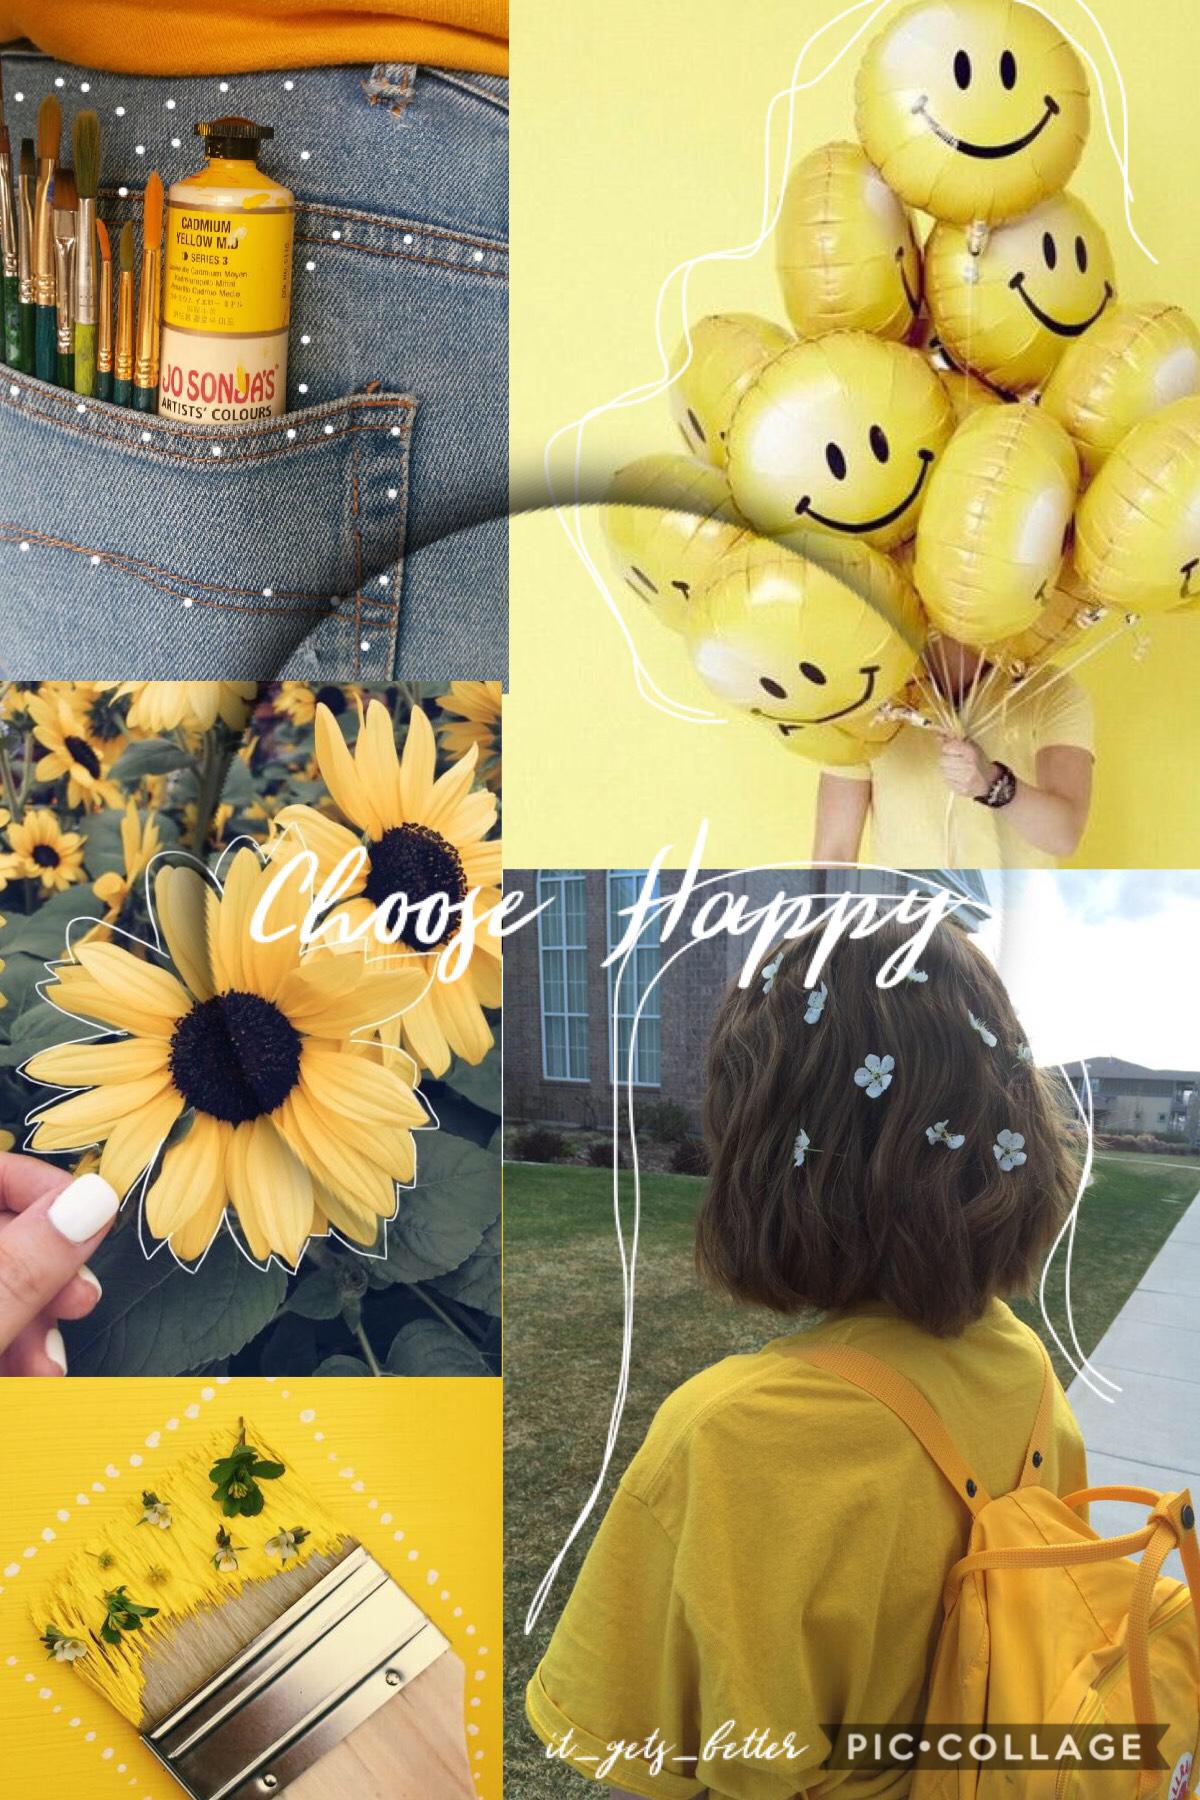                 tap—->🌻
I know that it can be hard to just “choose happy”, but try to focus on the little things in life that make you happy. Love you, have an amazing day💛